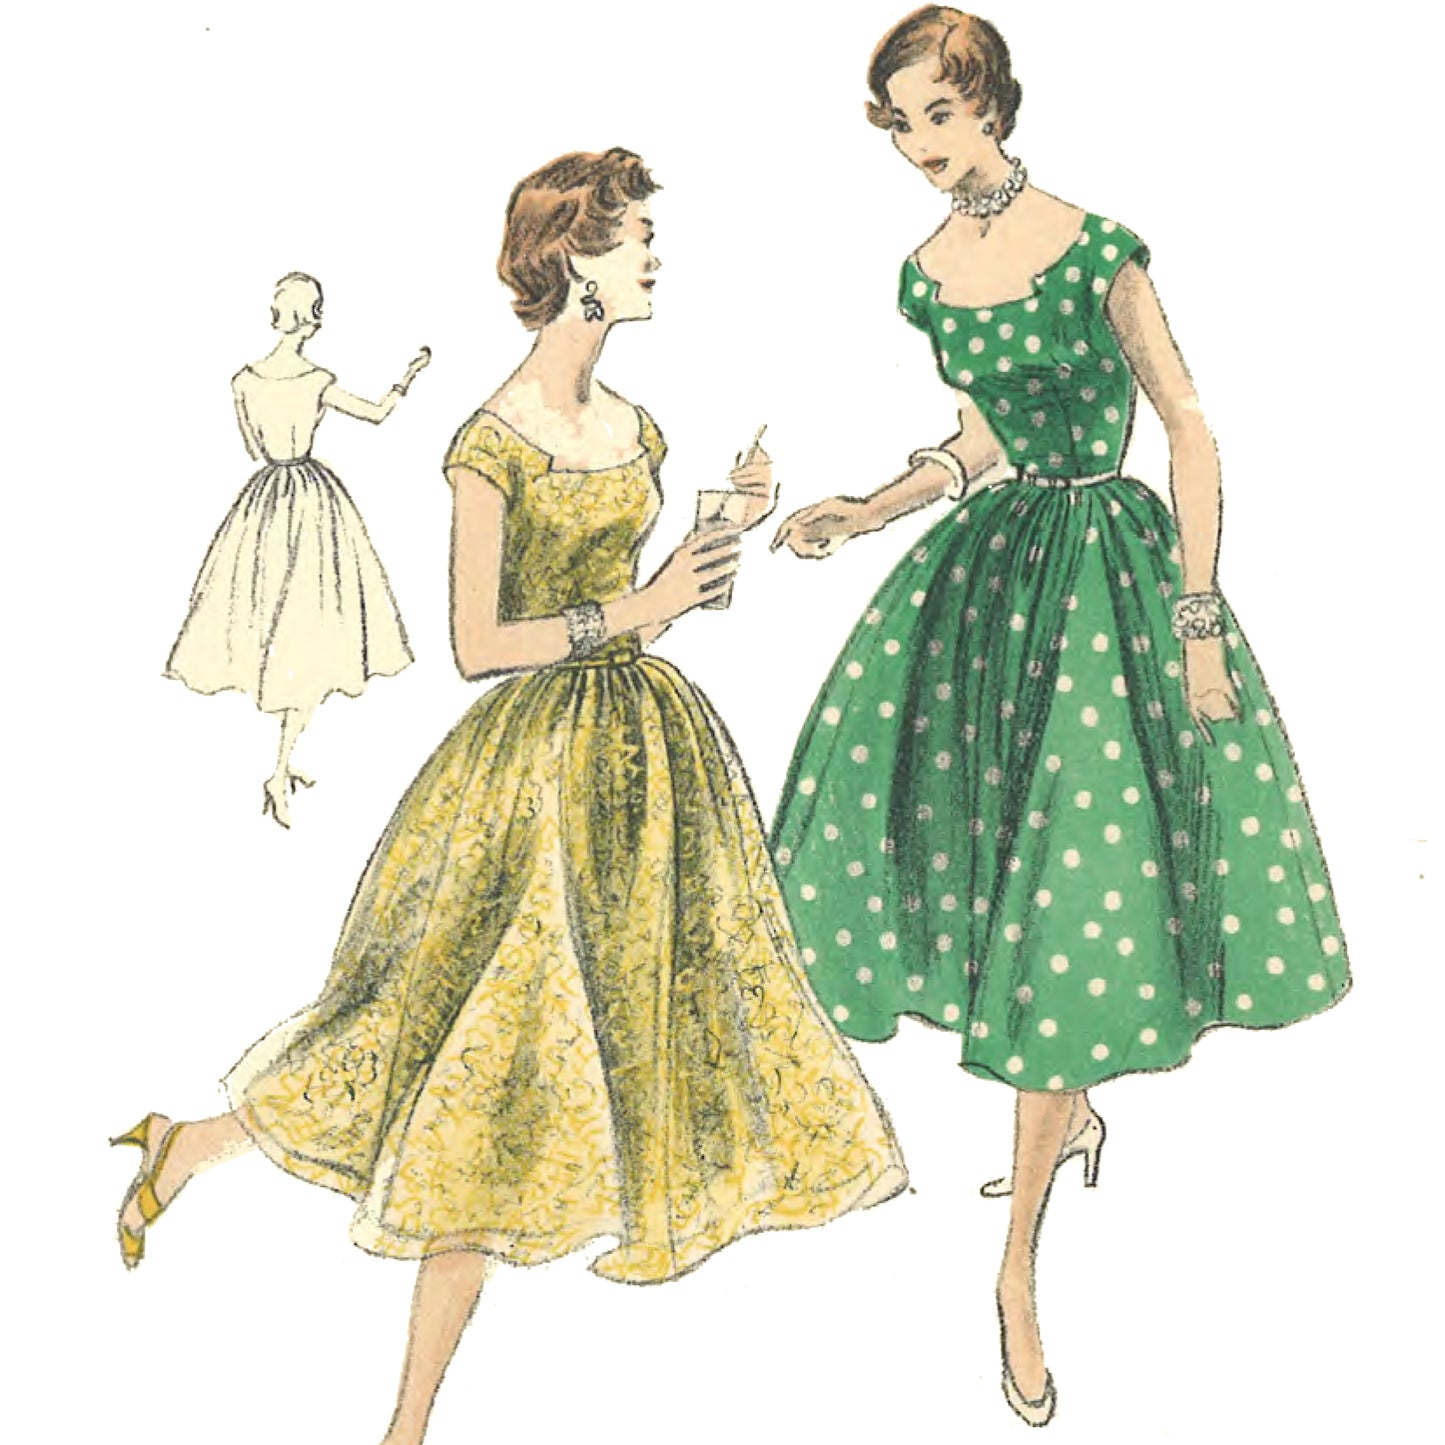 Women wearing rockabilly style dresses. Left, back view. Middle, yellow dress. Right, green and white polka dot dress.